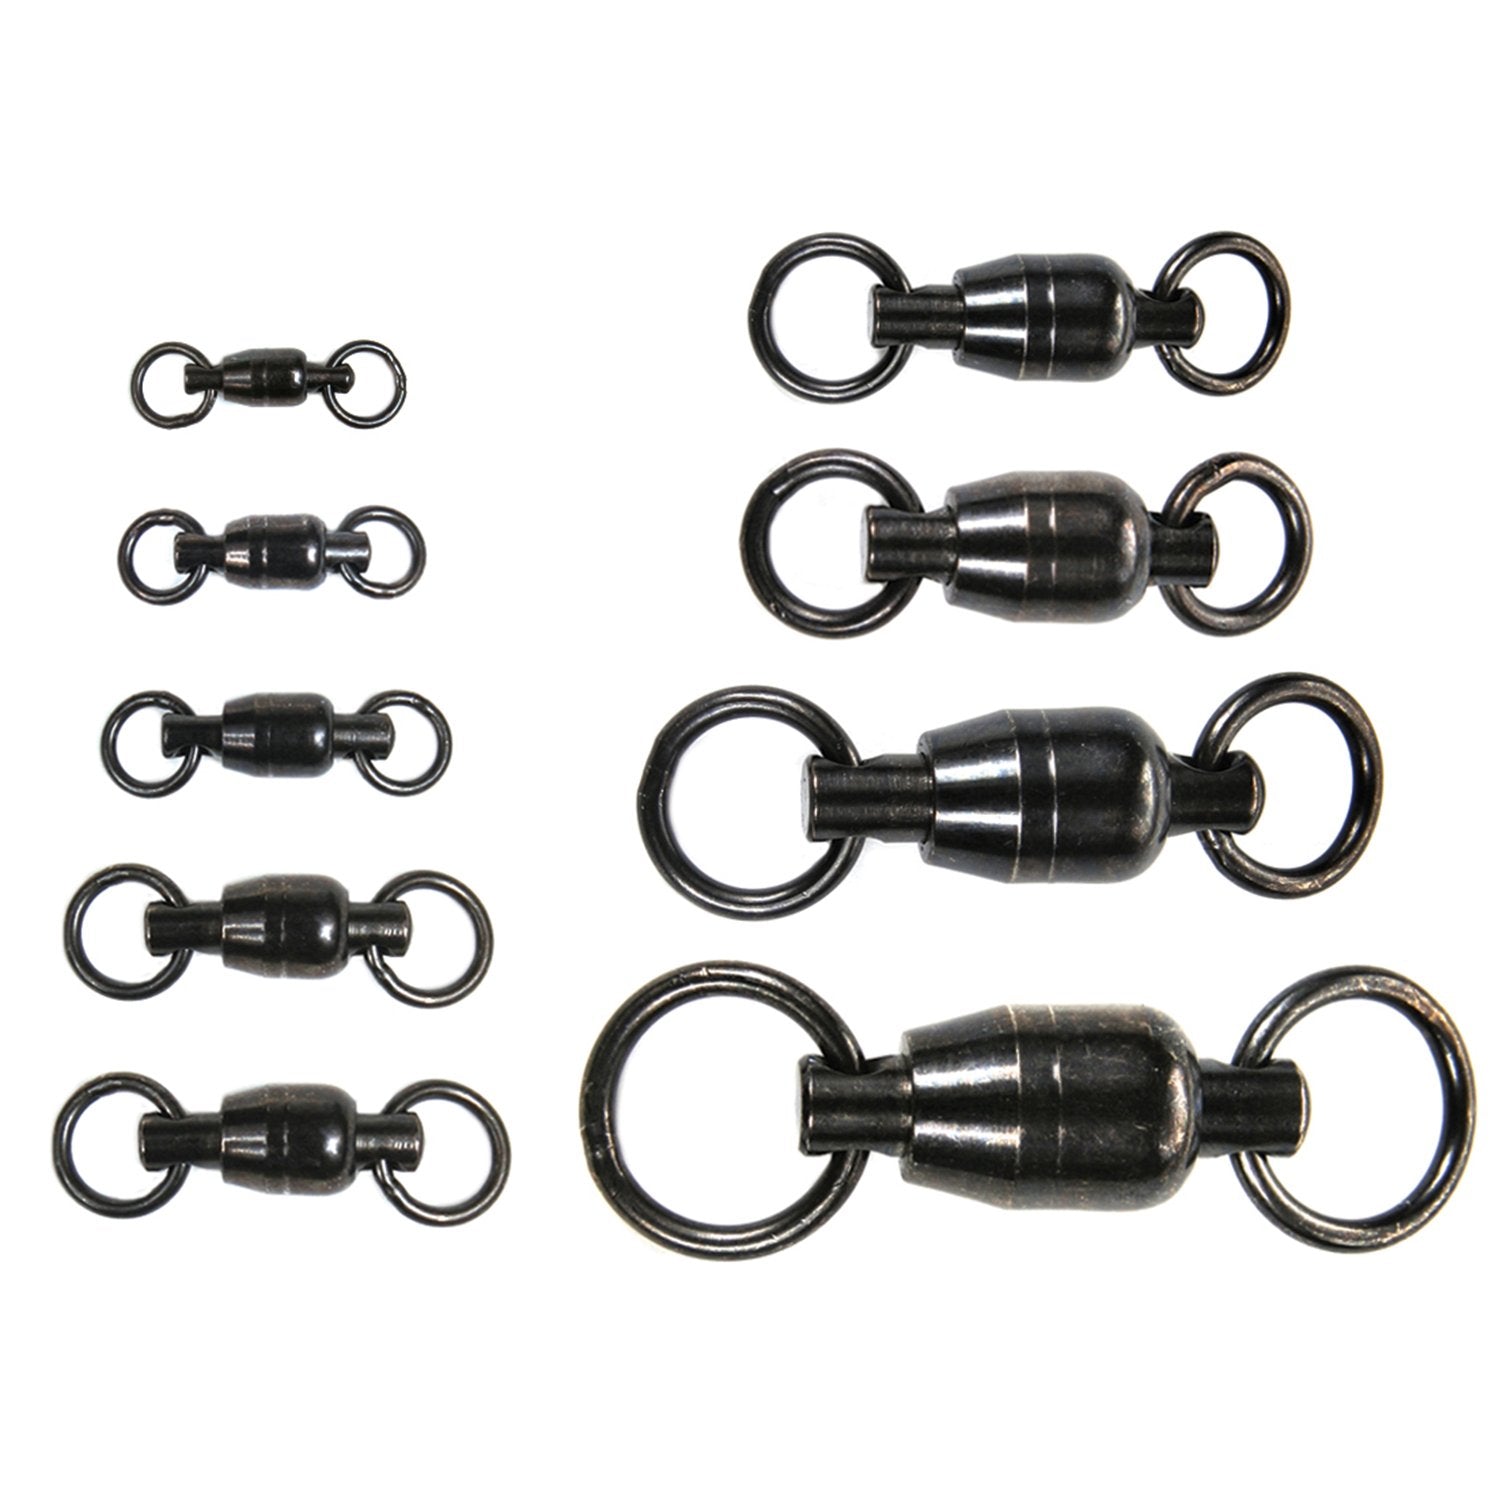 ball bearing swivels 0, ball bearing swivels 0 Suppliers and Manufacturers  at